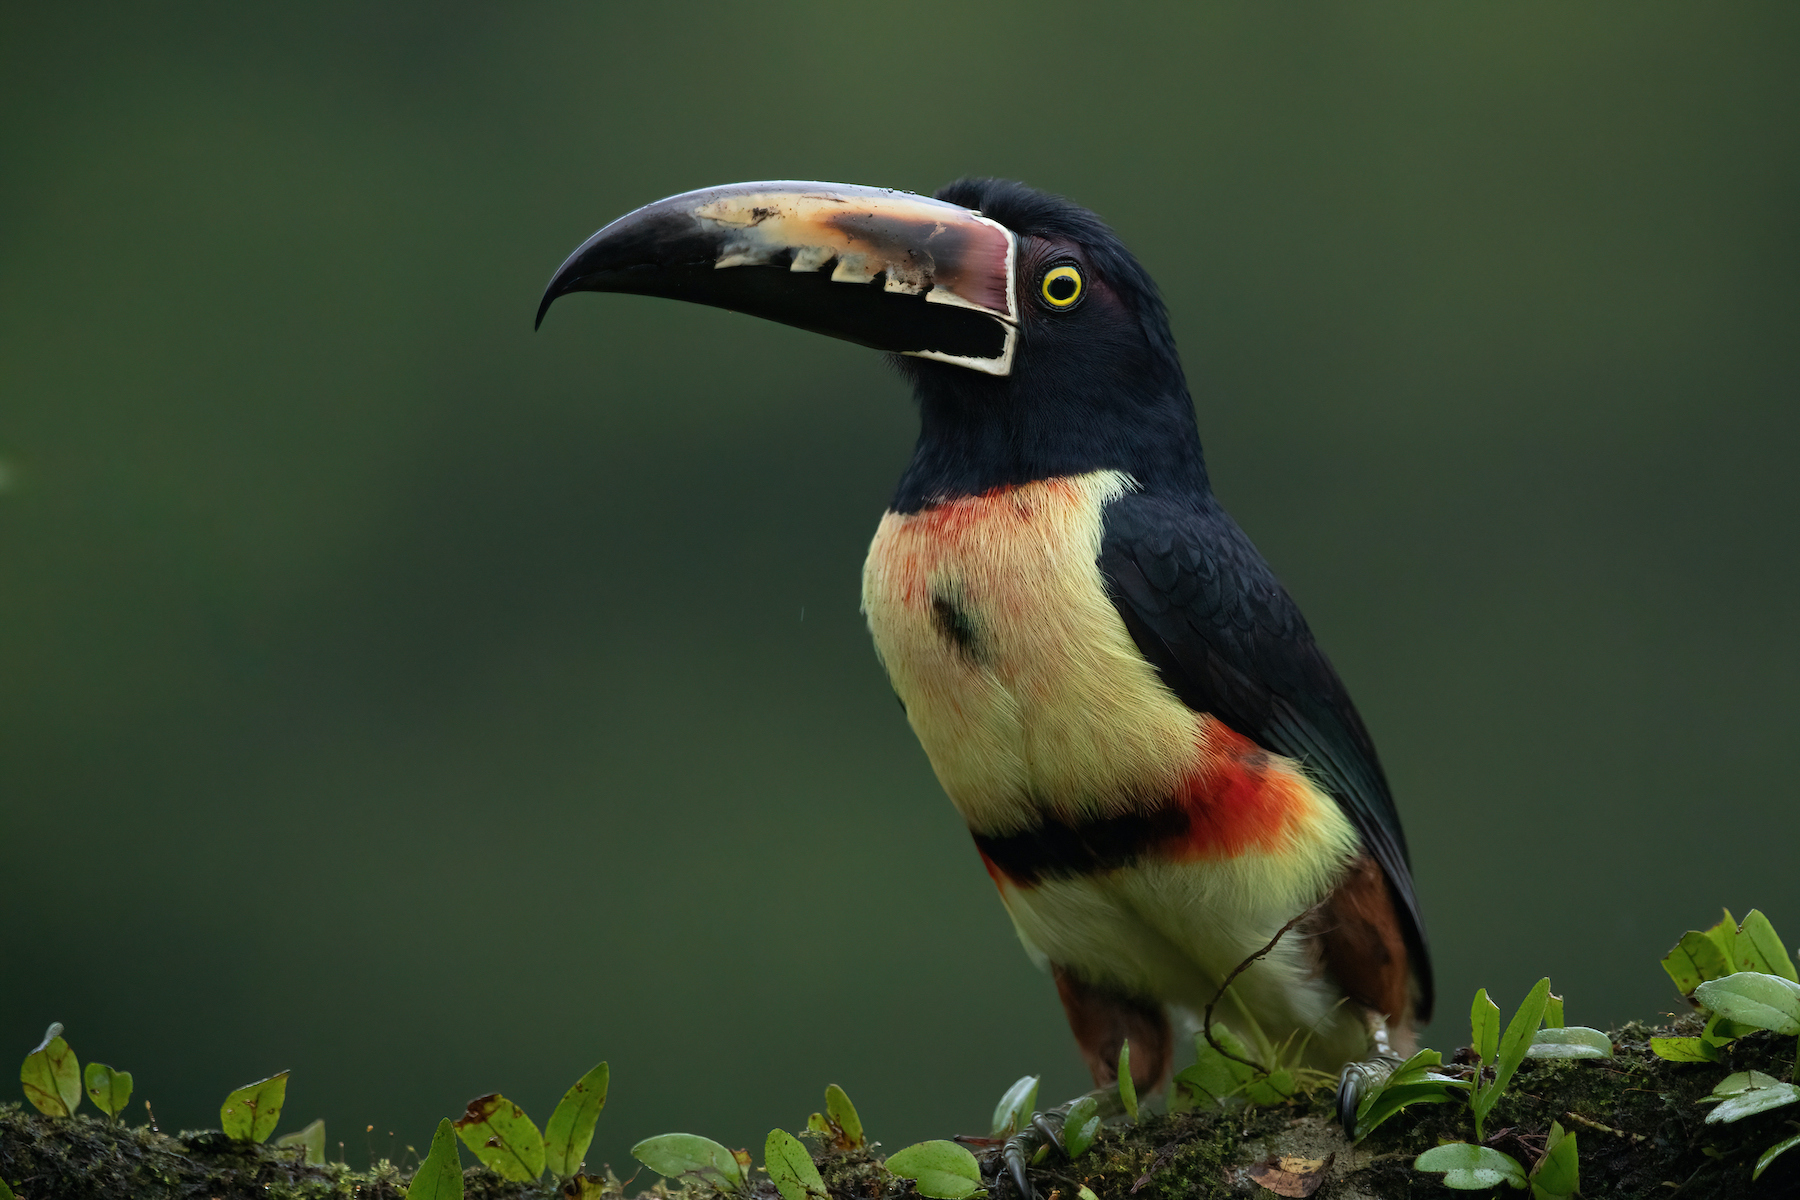 Collared Aracaris are truly the clowns of Costa Rica's rainforests.